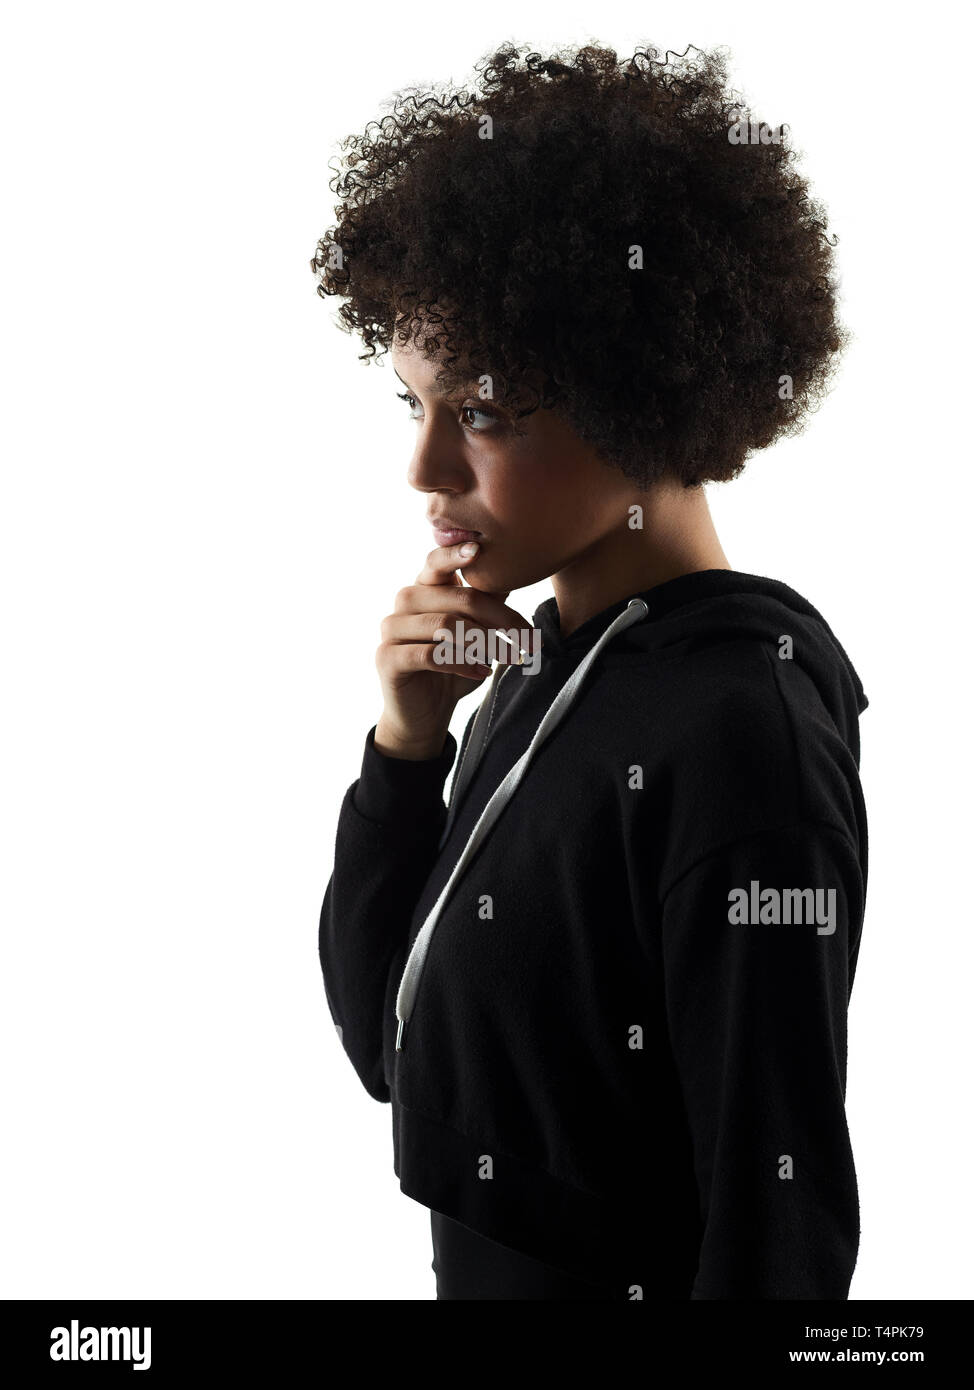 https://c8.alamy.com/comp/T4PK79/one-mixed-race-african-young-teenager-girl-woman-thinking-in-studio-shadow-silhouette-isolated-on-white-background-T4PK79.jpg